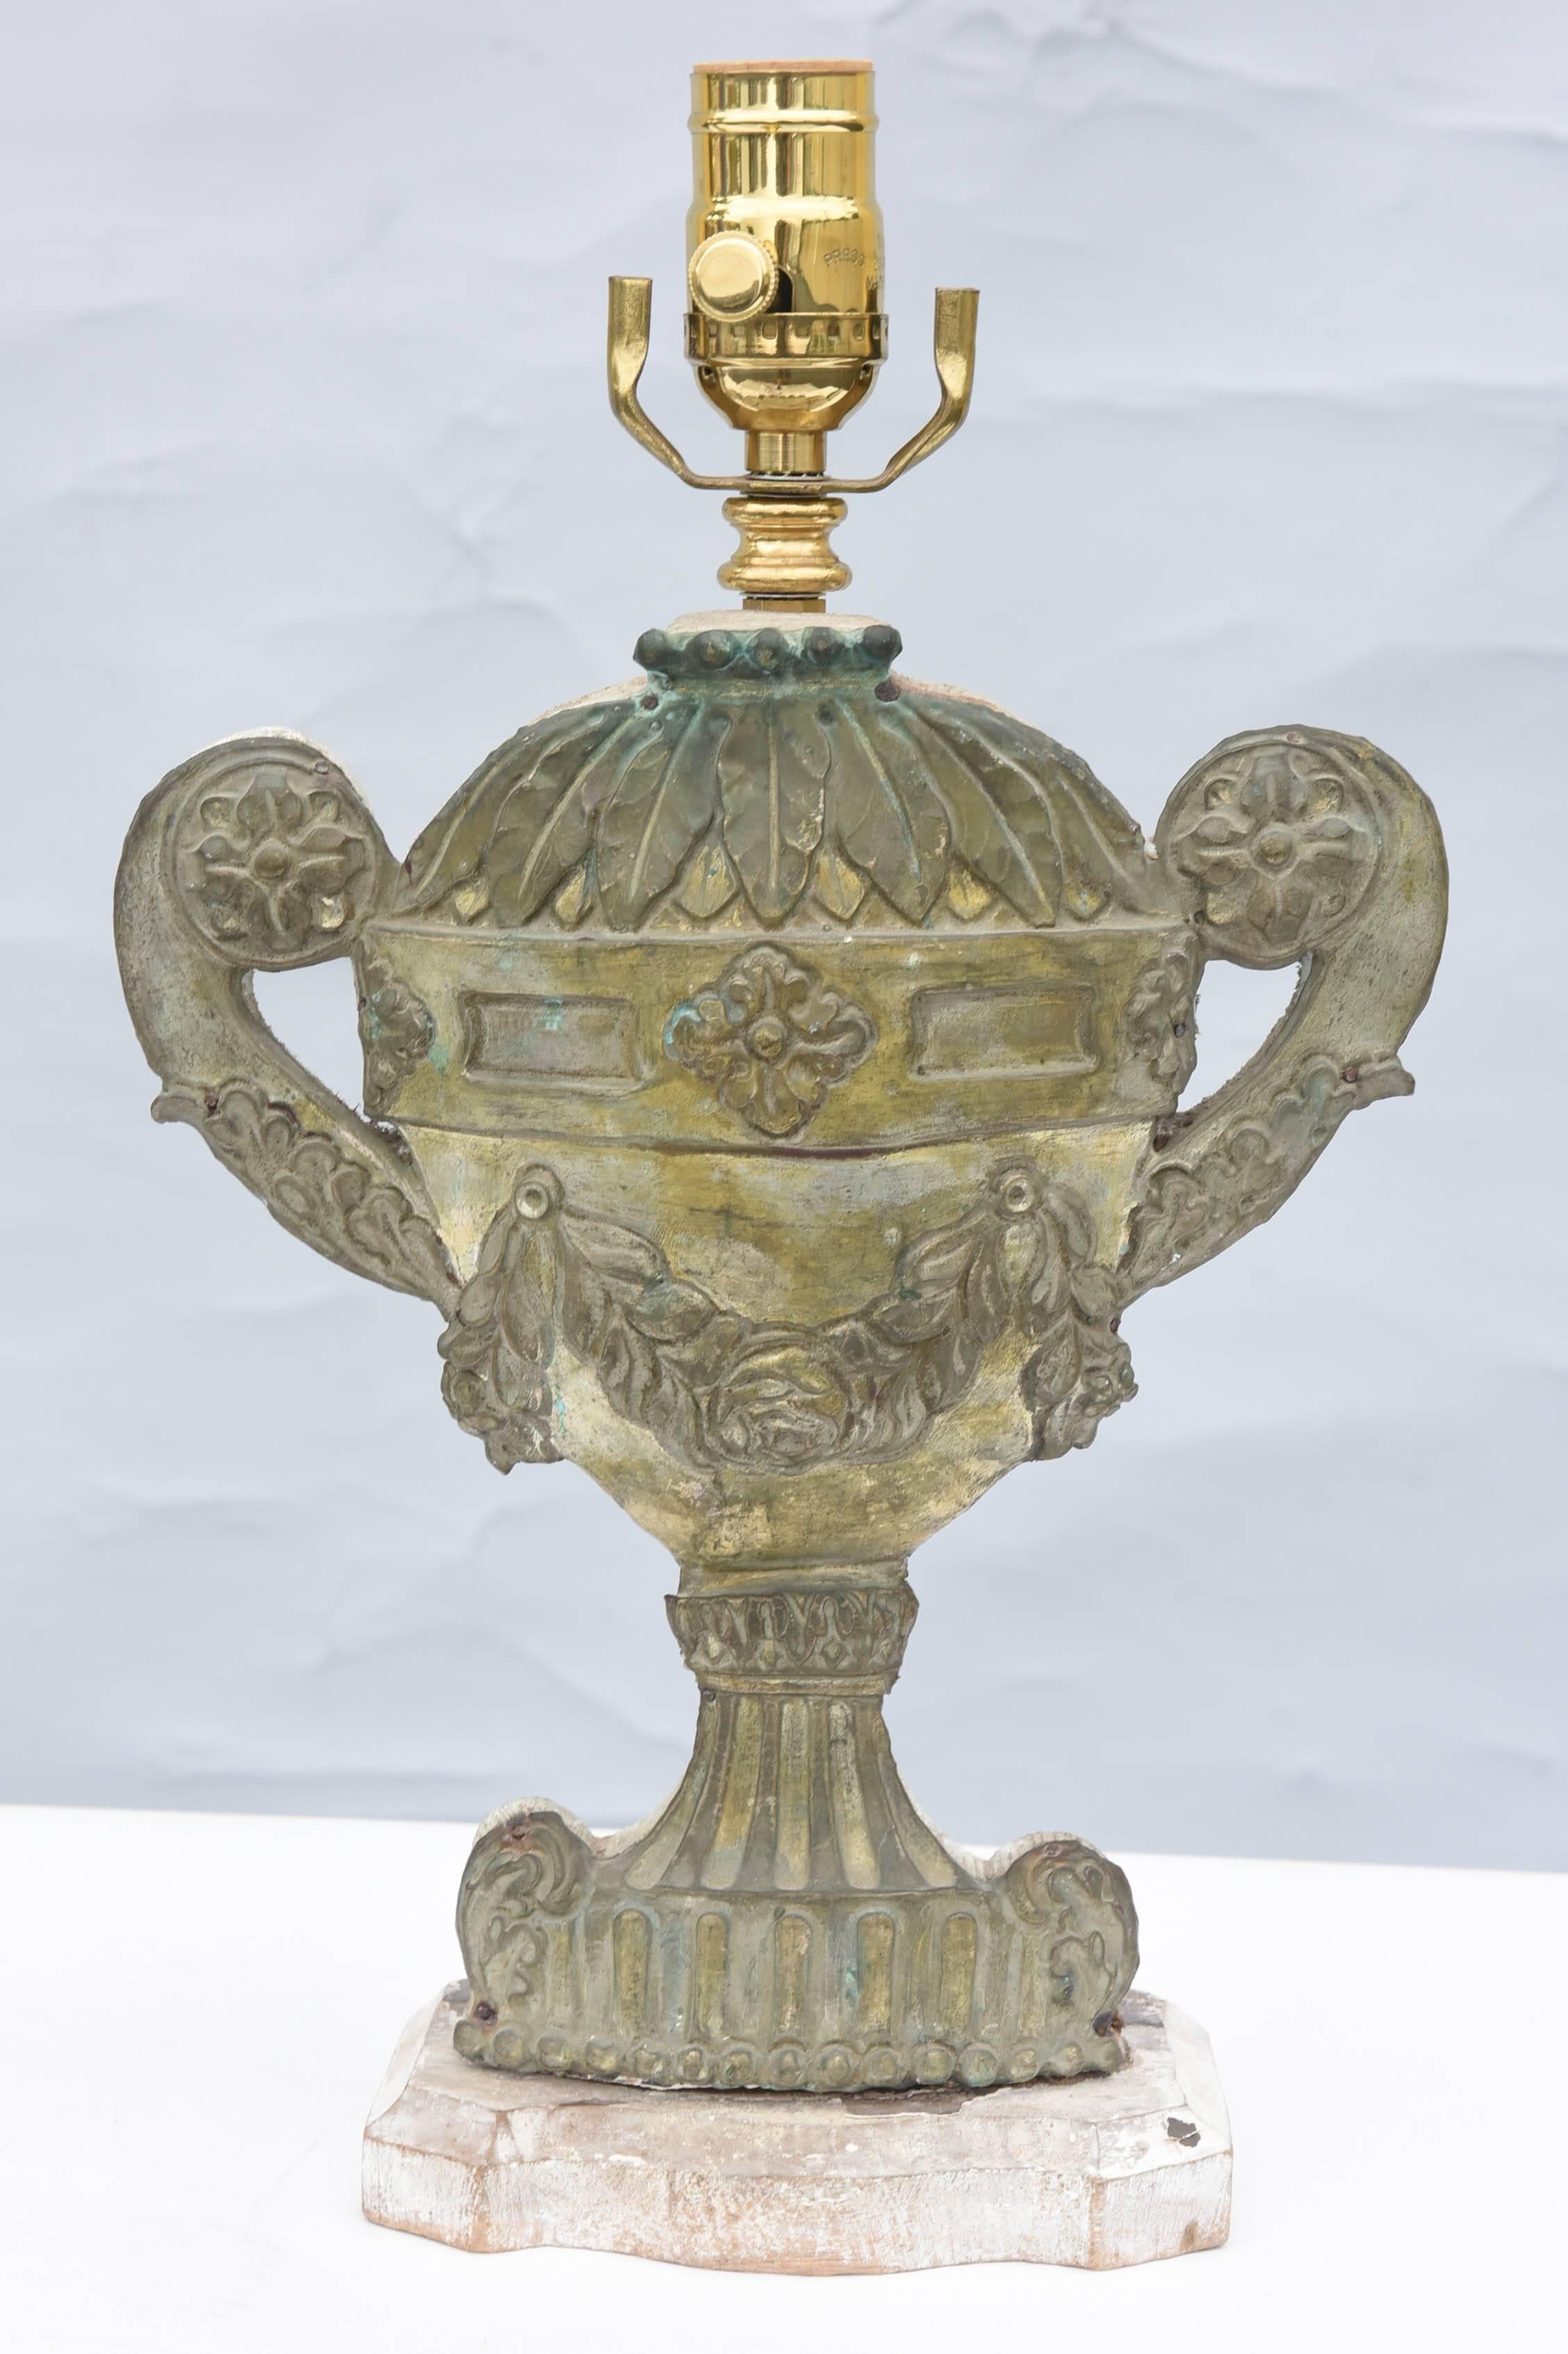 Pair of lamps, of repoussé bronze, each an urn with a cap of laurel leaves, fluted body centered with a rosette, flanked by scrolling handles, decorated by acanthus leaves, on fluted socle and foot; wooden backplate and base.

Stock ID: D6242